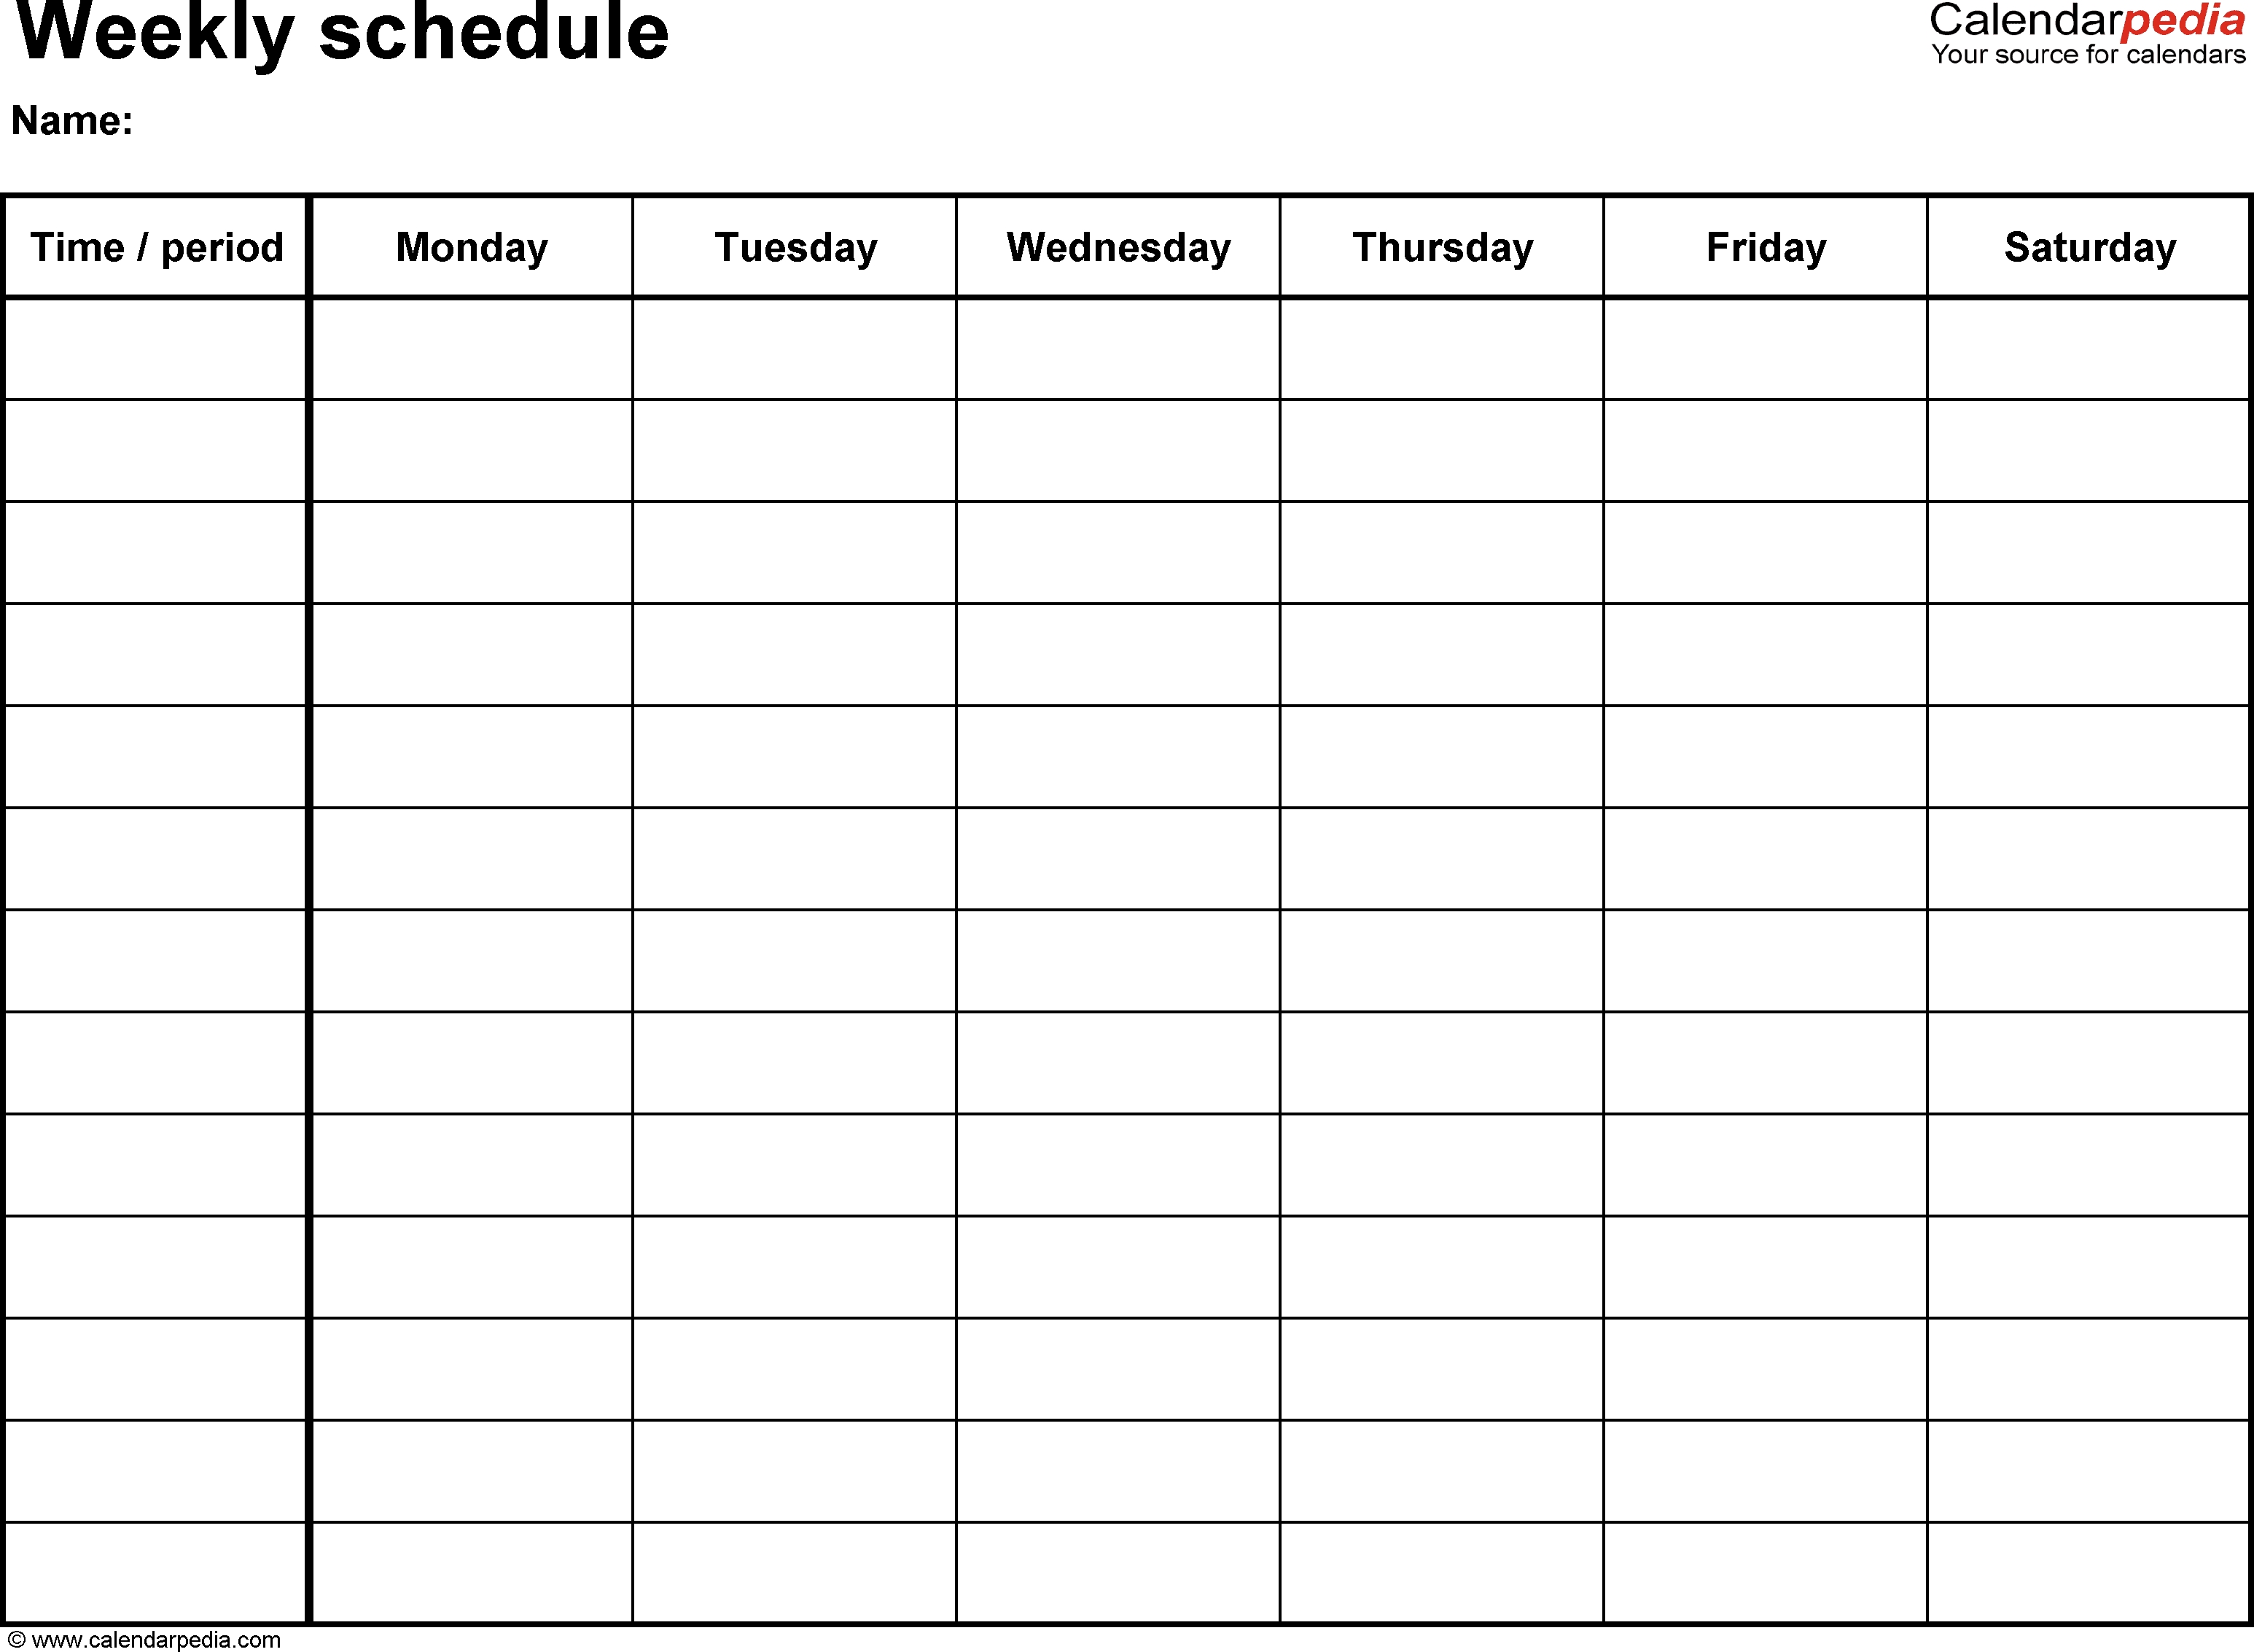 Free Weekly Schedule Templates For Word - 18 Templates-Weekly Calendar Template Monday To Friday